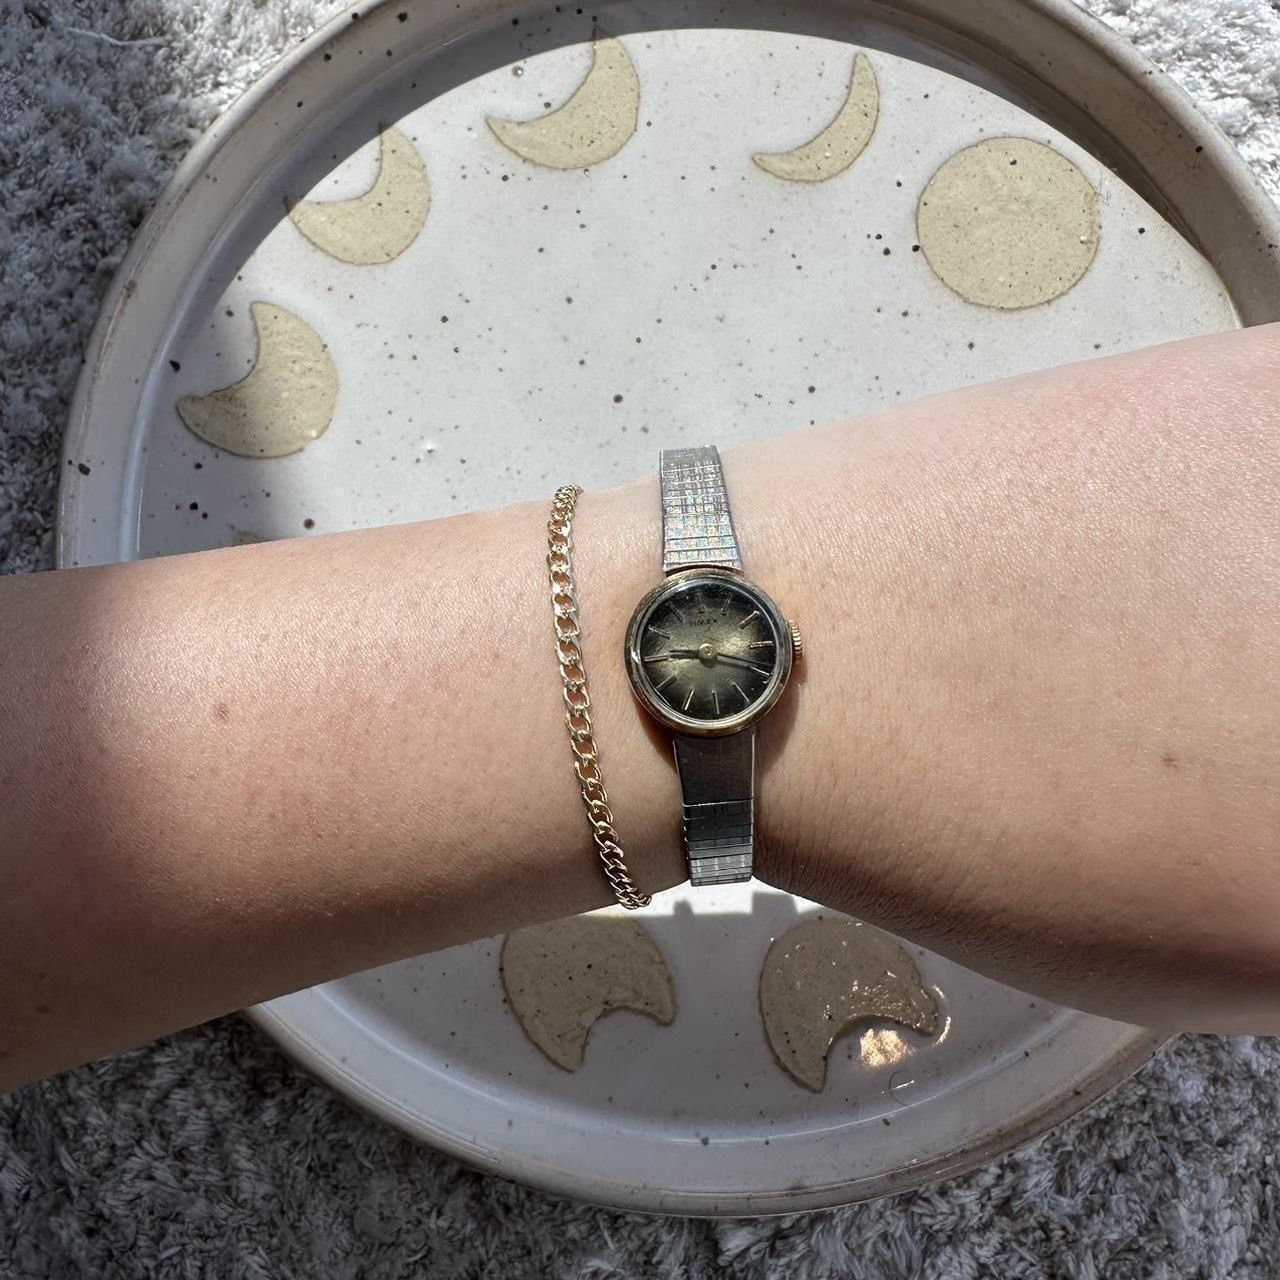 Vintage dainty cute silver watch with gray face and gold details!